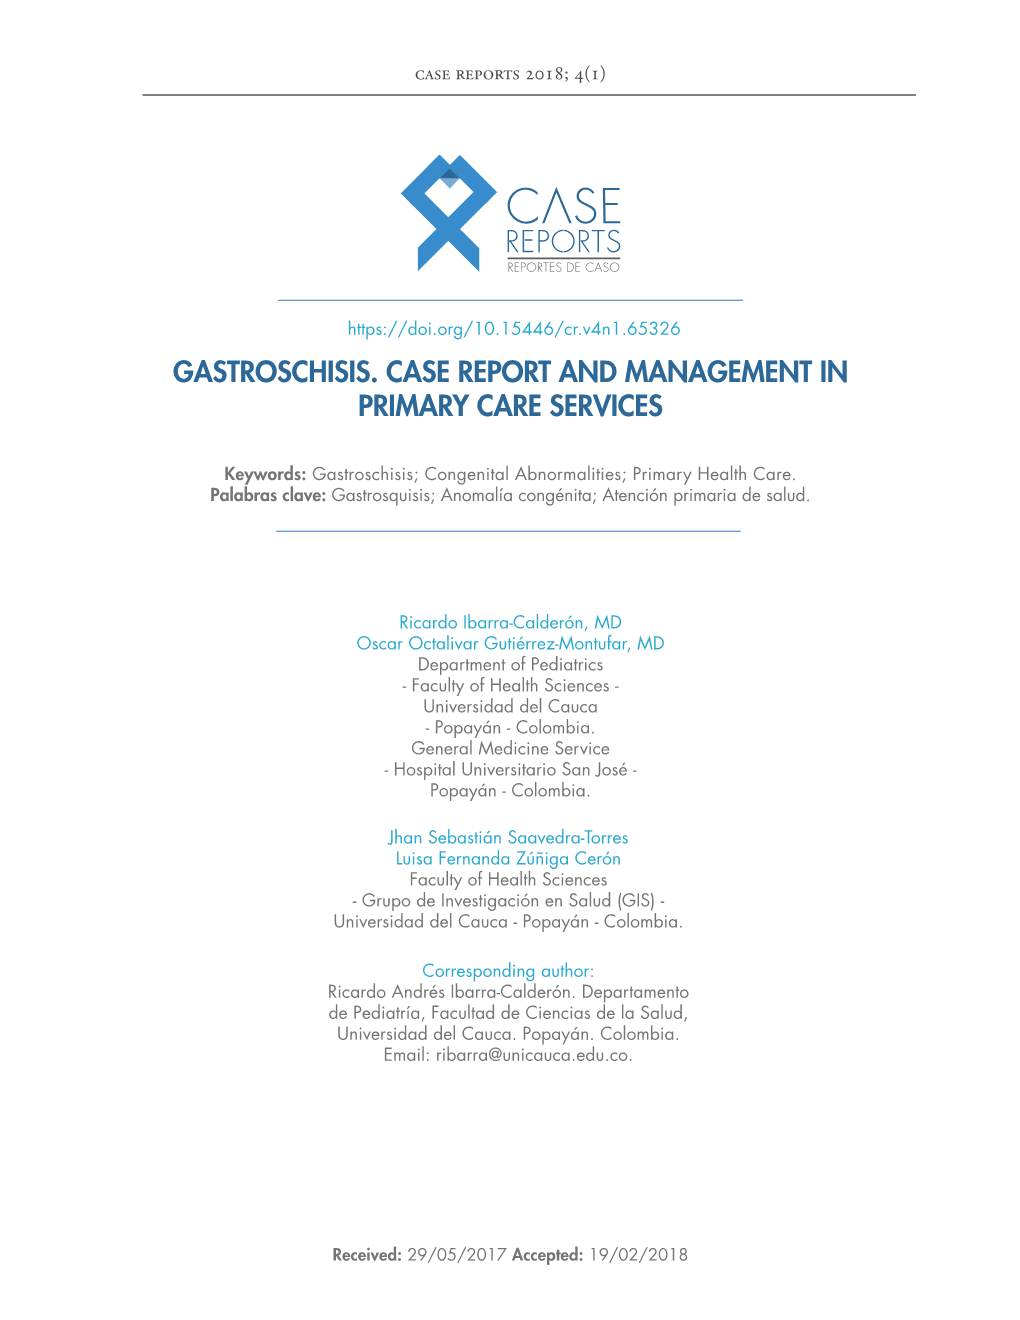 Gastroschisis. Case Report and Management in Primary Care Services